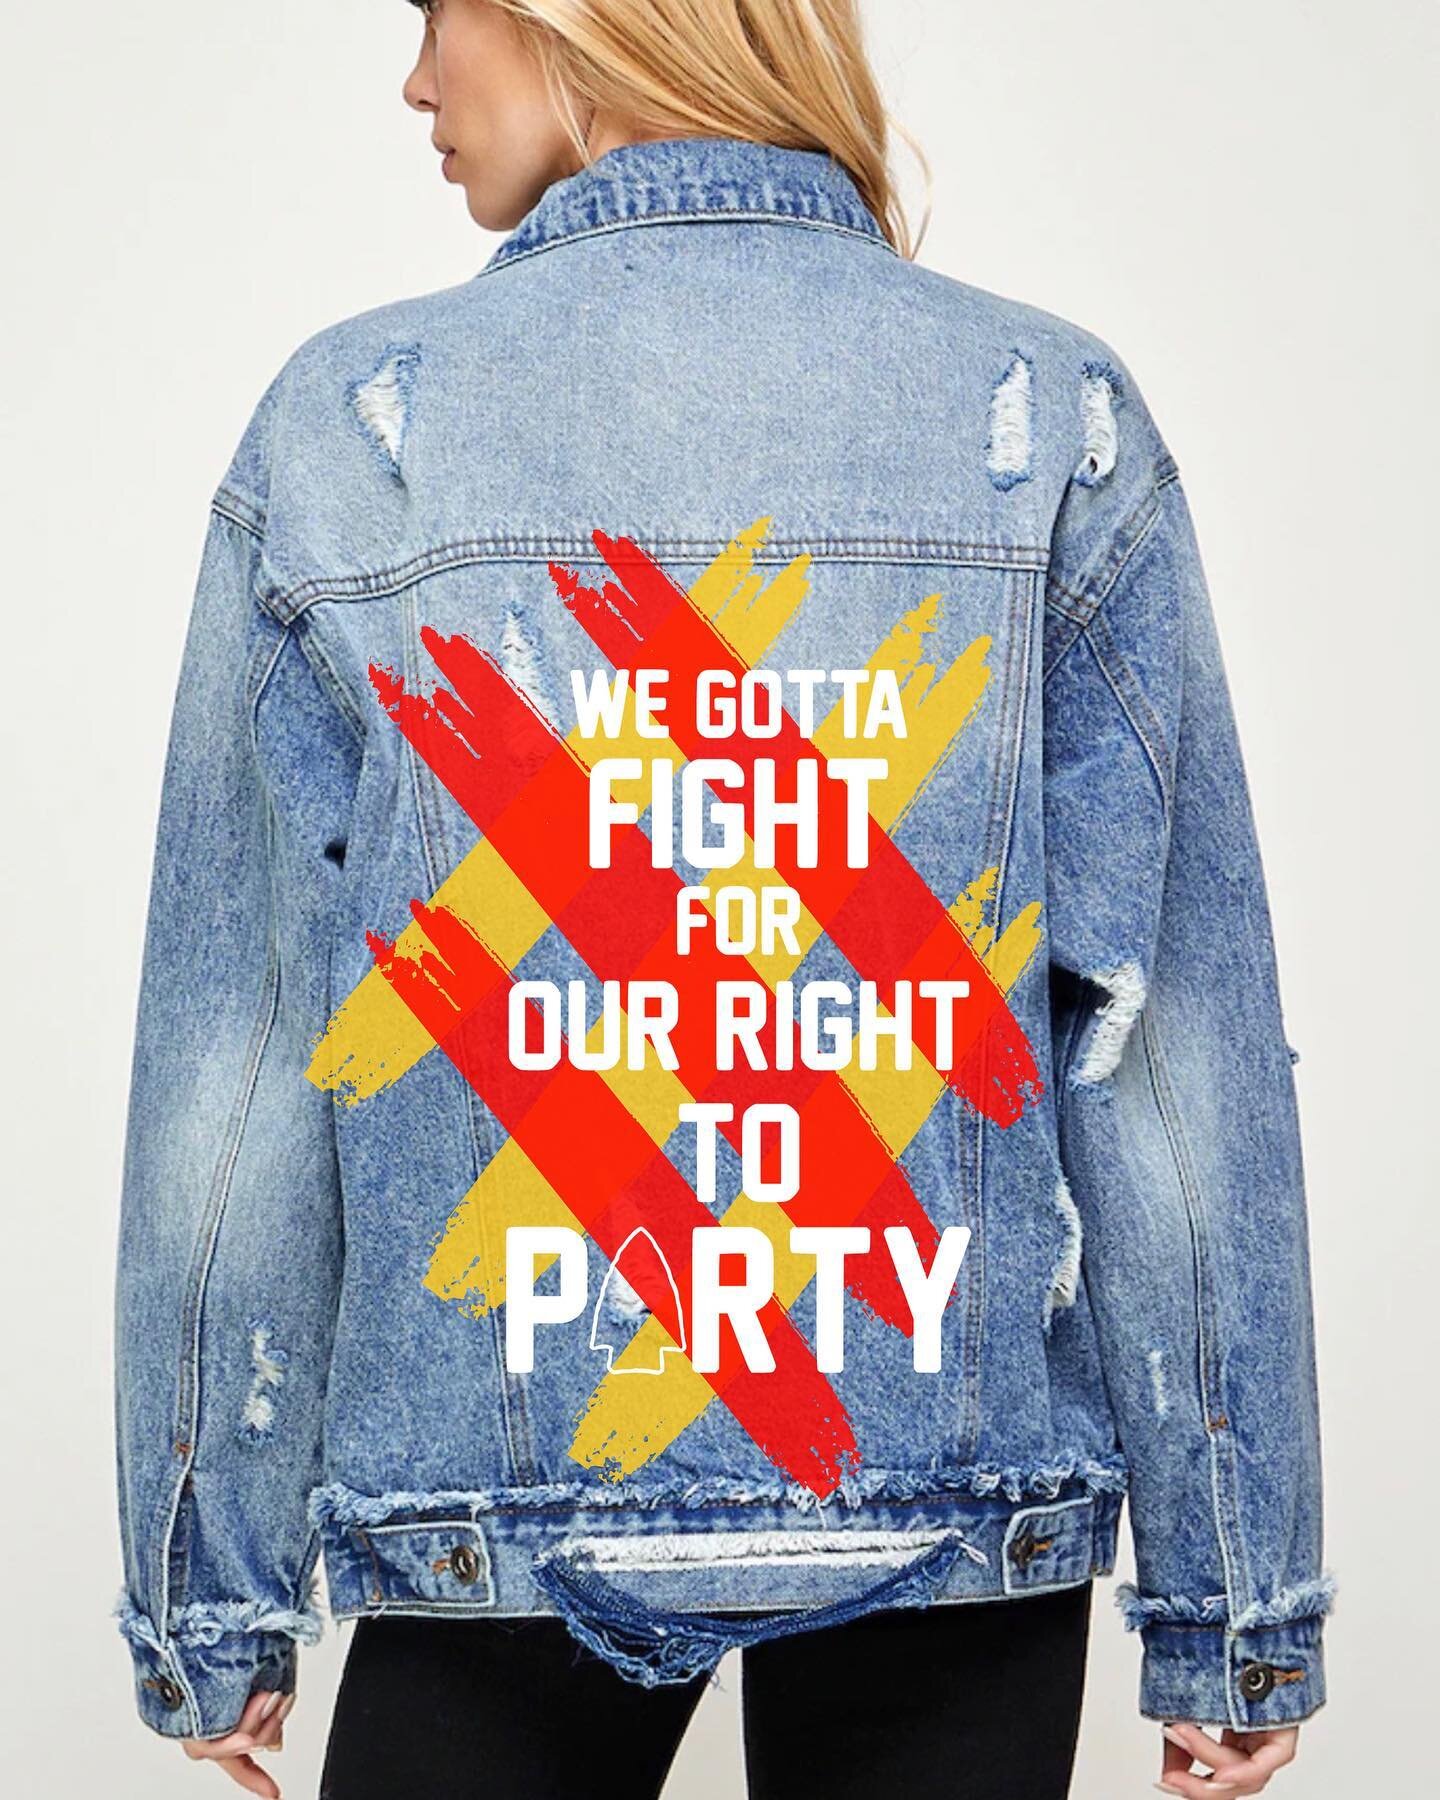 We are SO EXCITED to be bringing back our original &ldquo;Party&rdquo; jacket that put us on the map in KC! PLUS a new extra fun one❤️💛 

Shop via the link in our bio now to buy both!! 

#maddenim #maddenimkc #kcchiefs #denimjacket #chiefsapparel #k